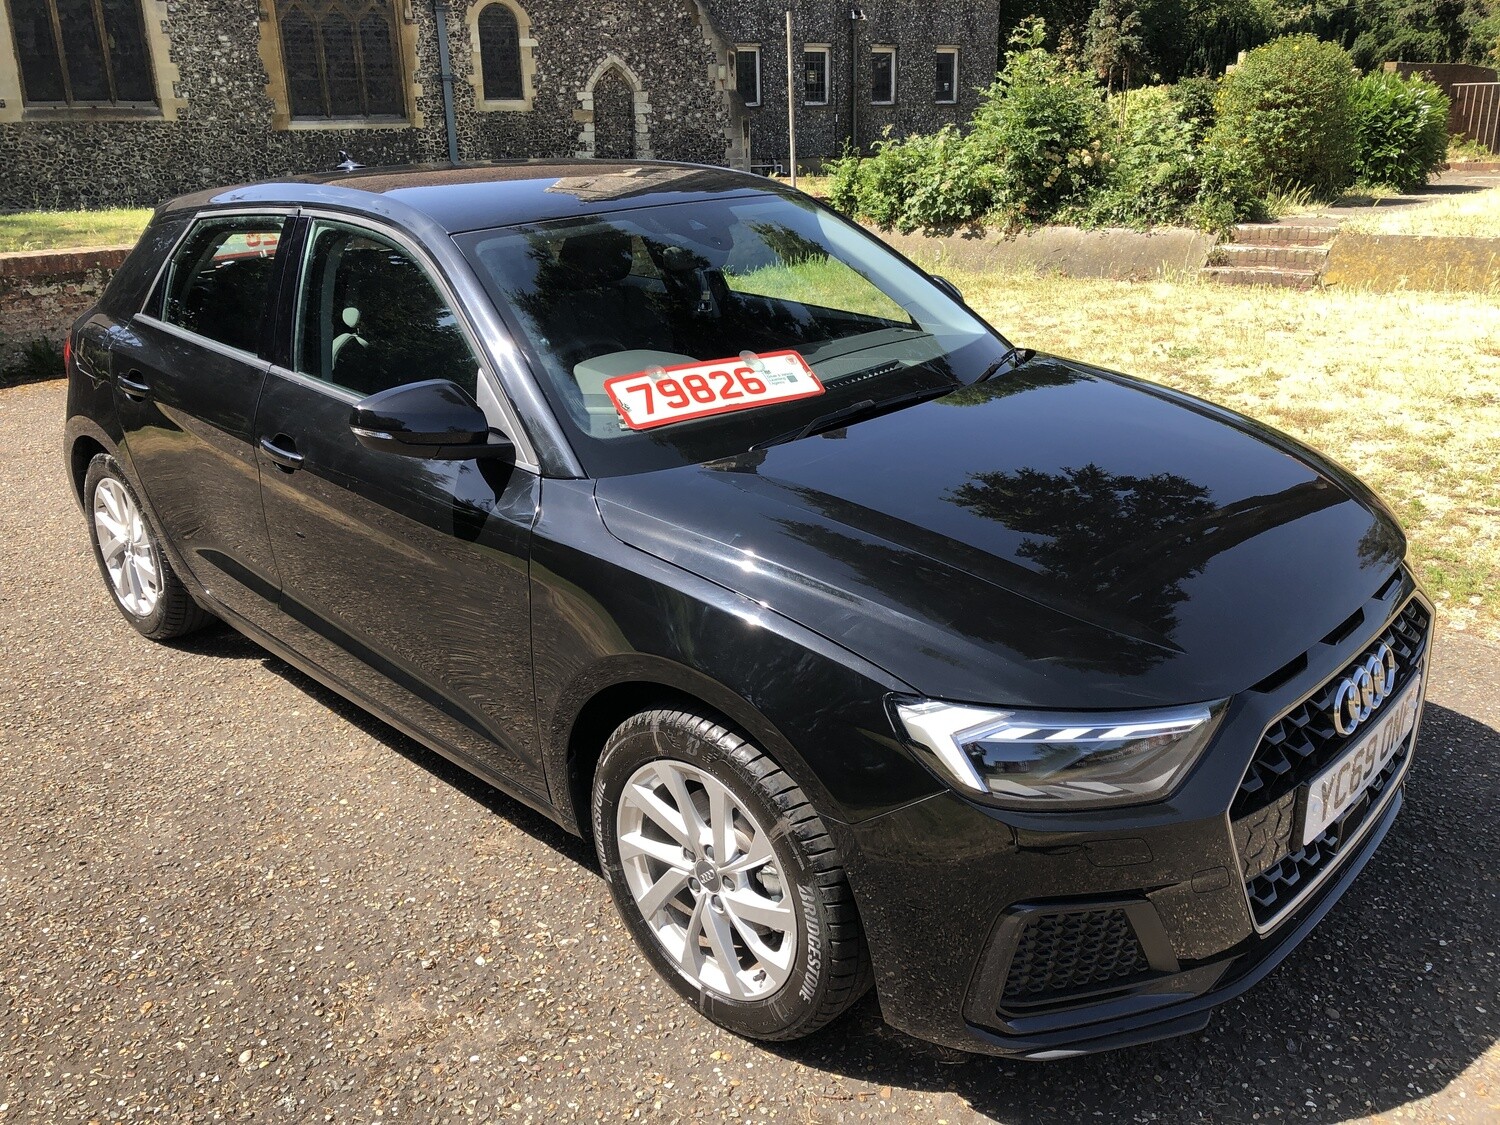 SOLD..AUDI NEW A1 1.0 TFSI AUTO 69 REG NEW SHAPE 1,100 MILES ONLY!